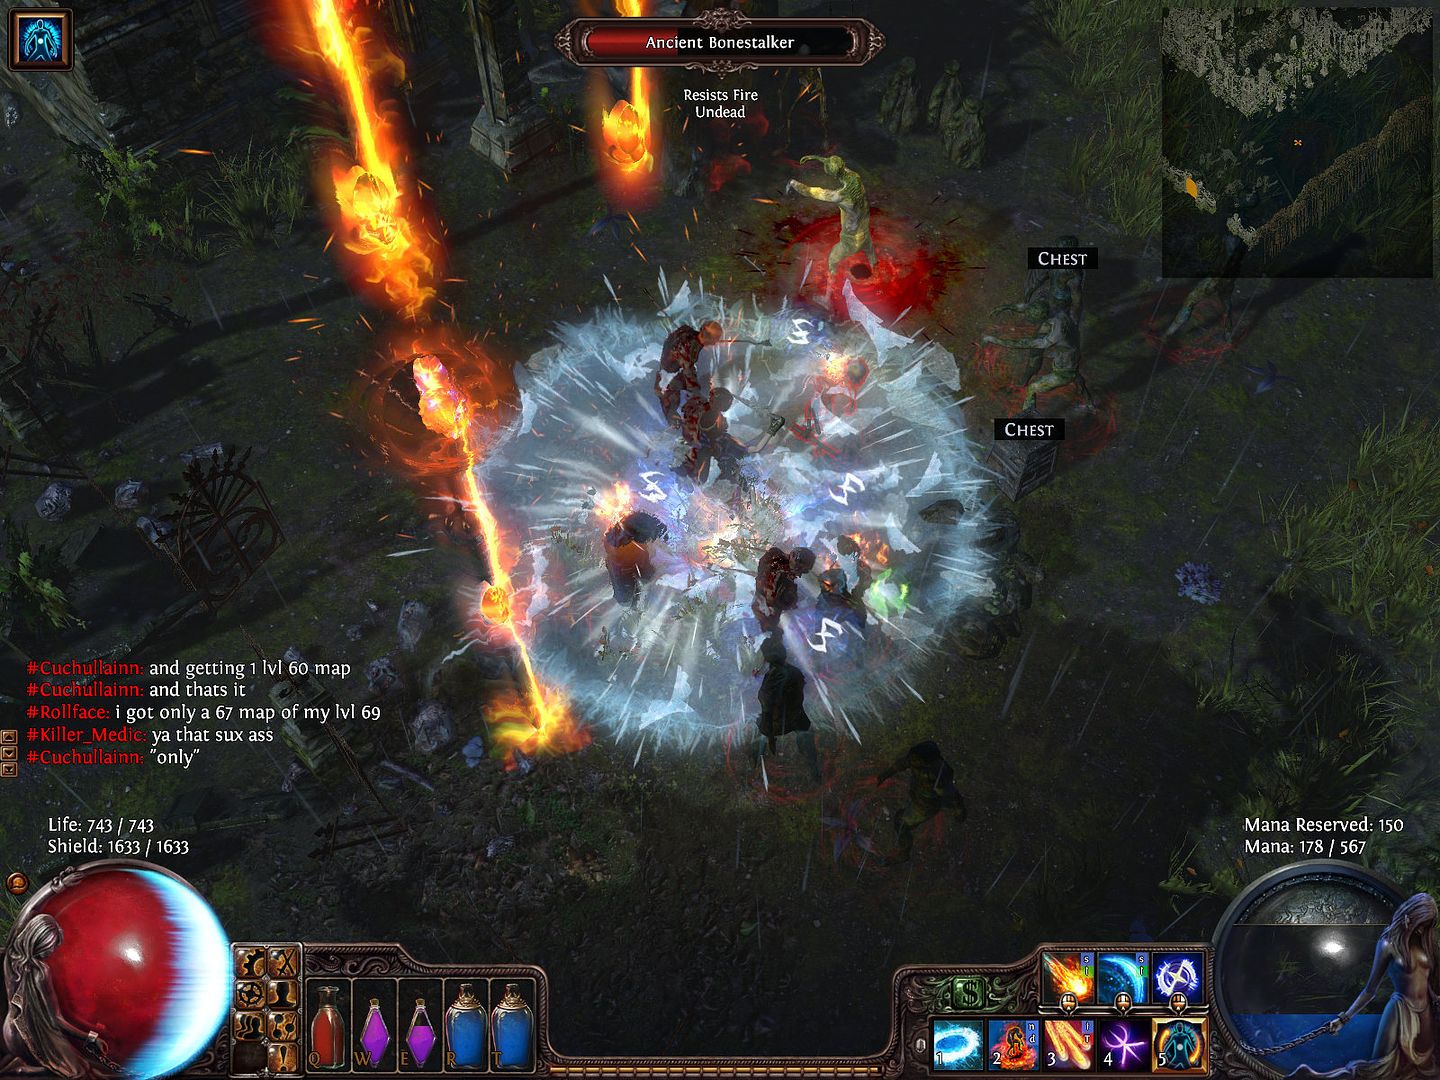 Path Of Exile Frost Witch Builds